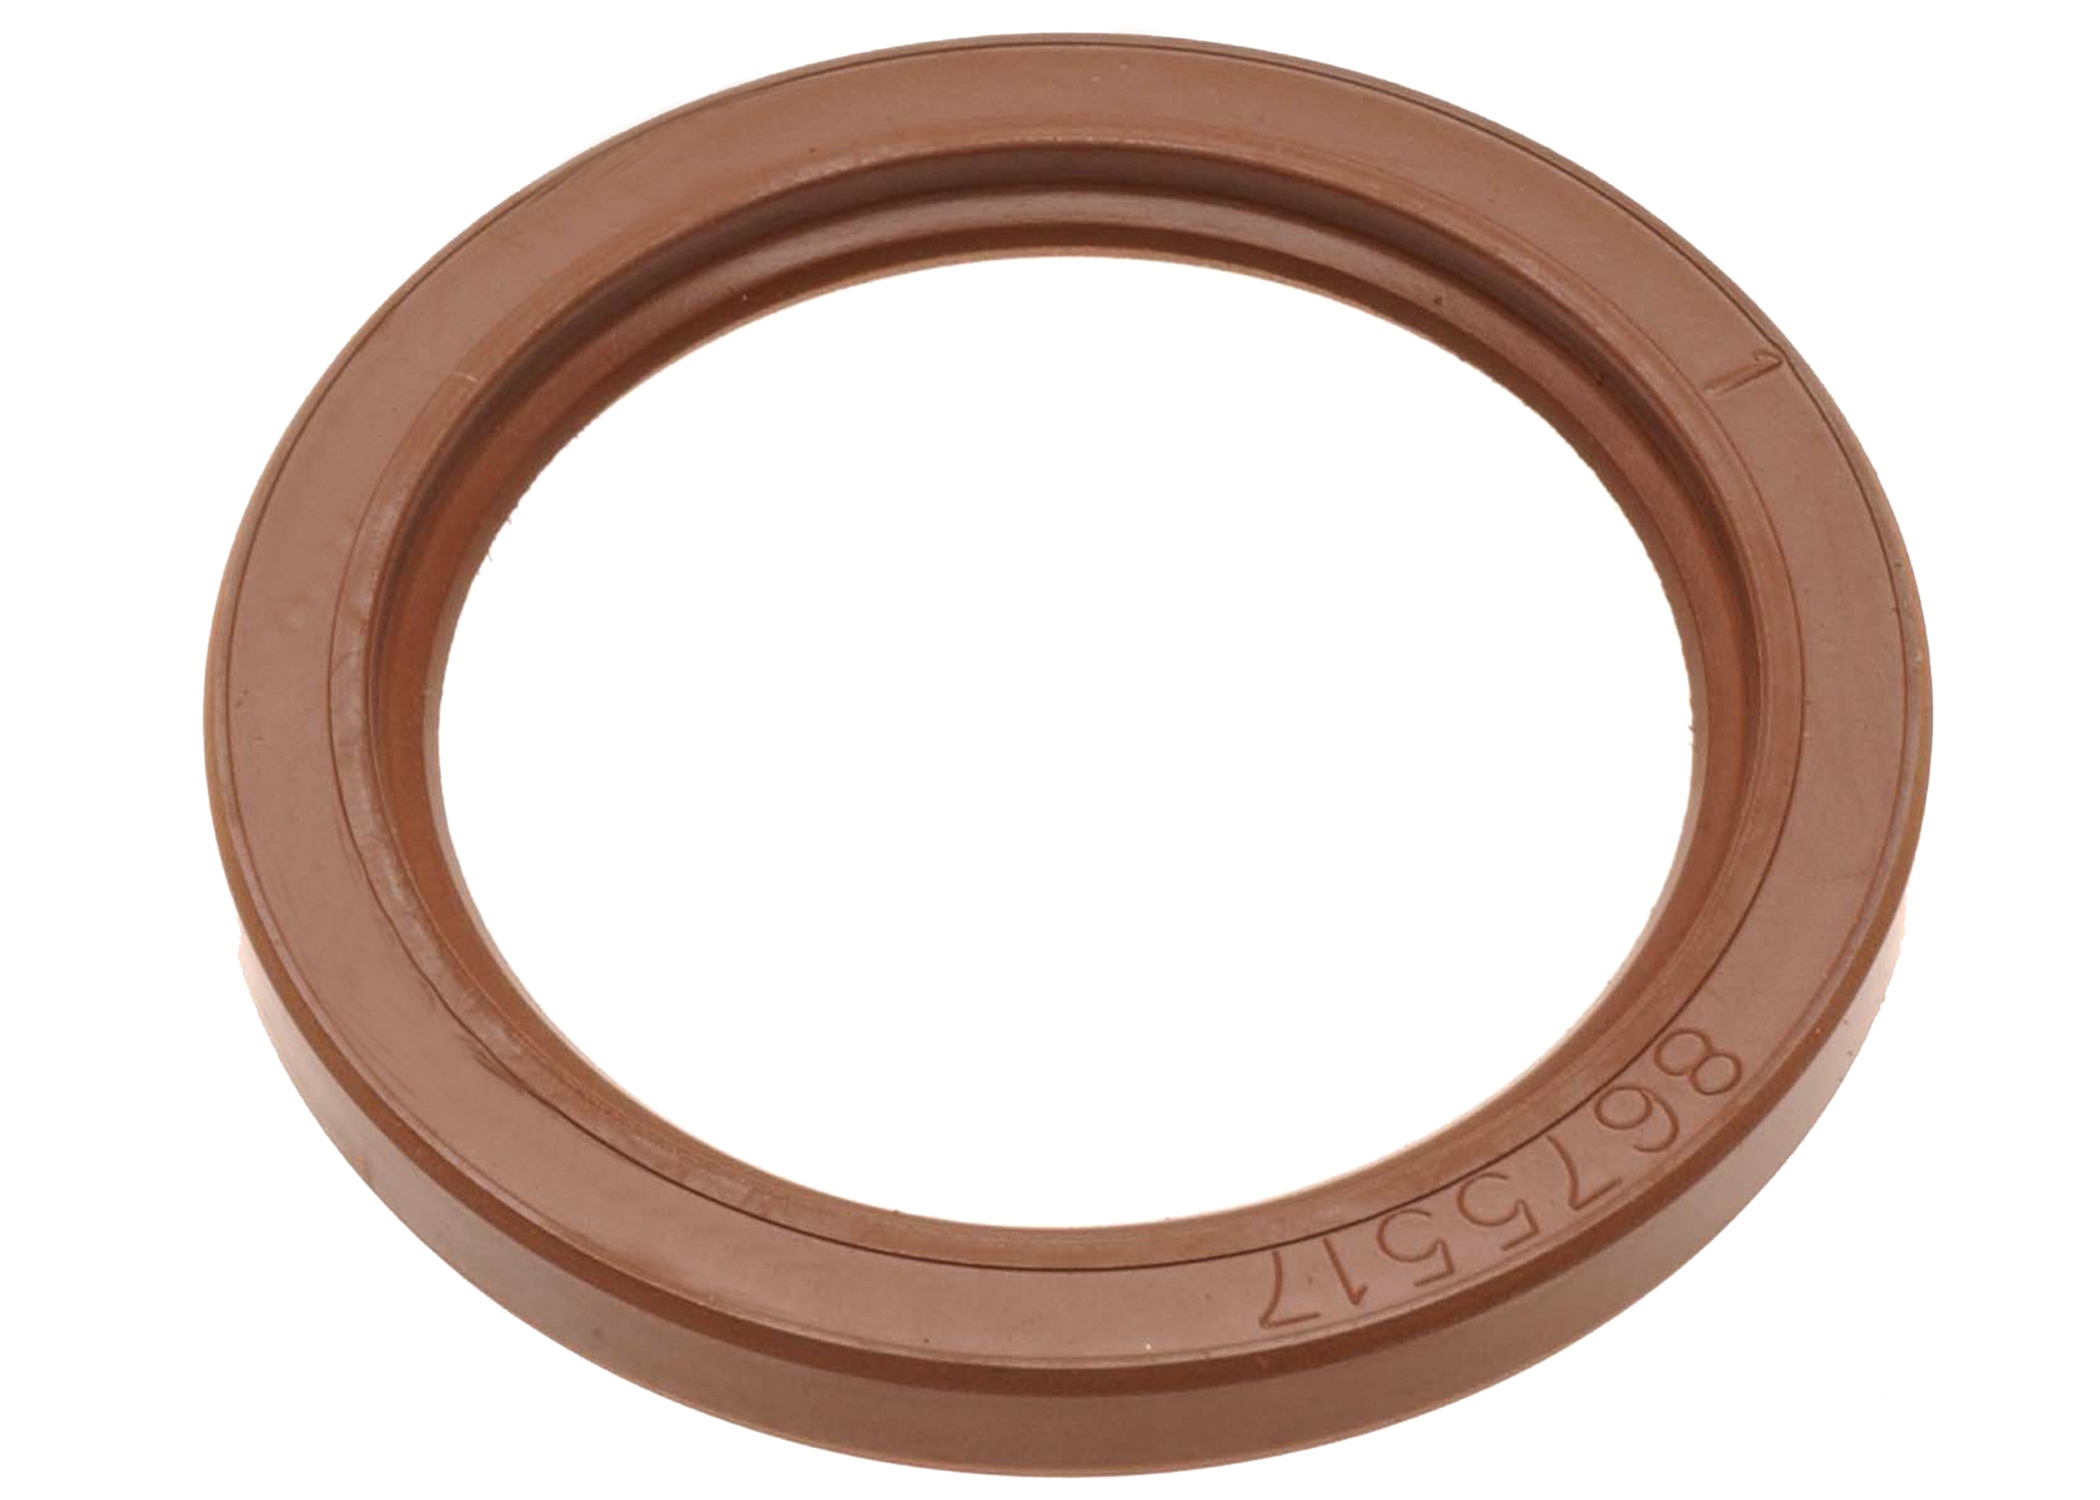 GM GENUINE PARTS CANADA - Automatic Transmission Output Shaft Seal - GMC 8675517